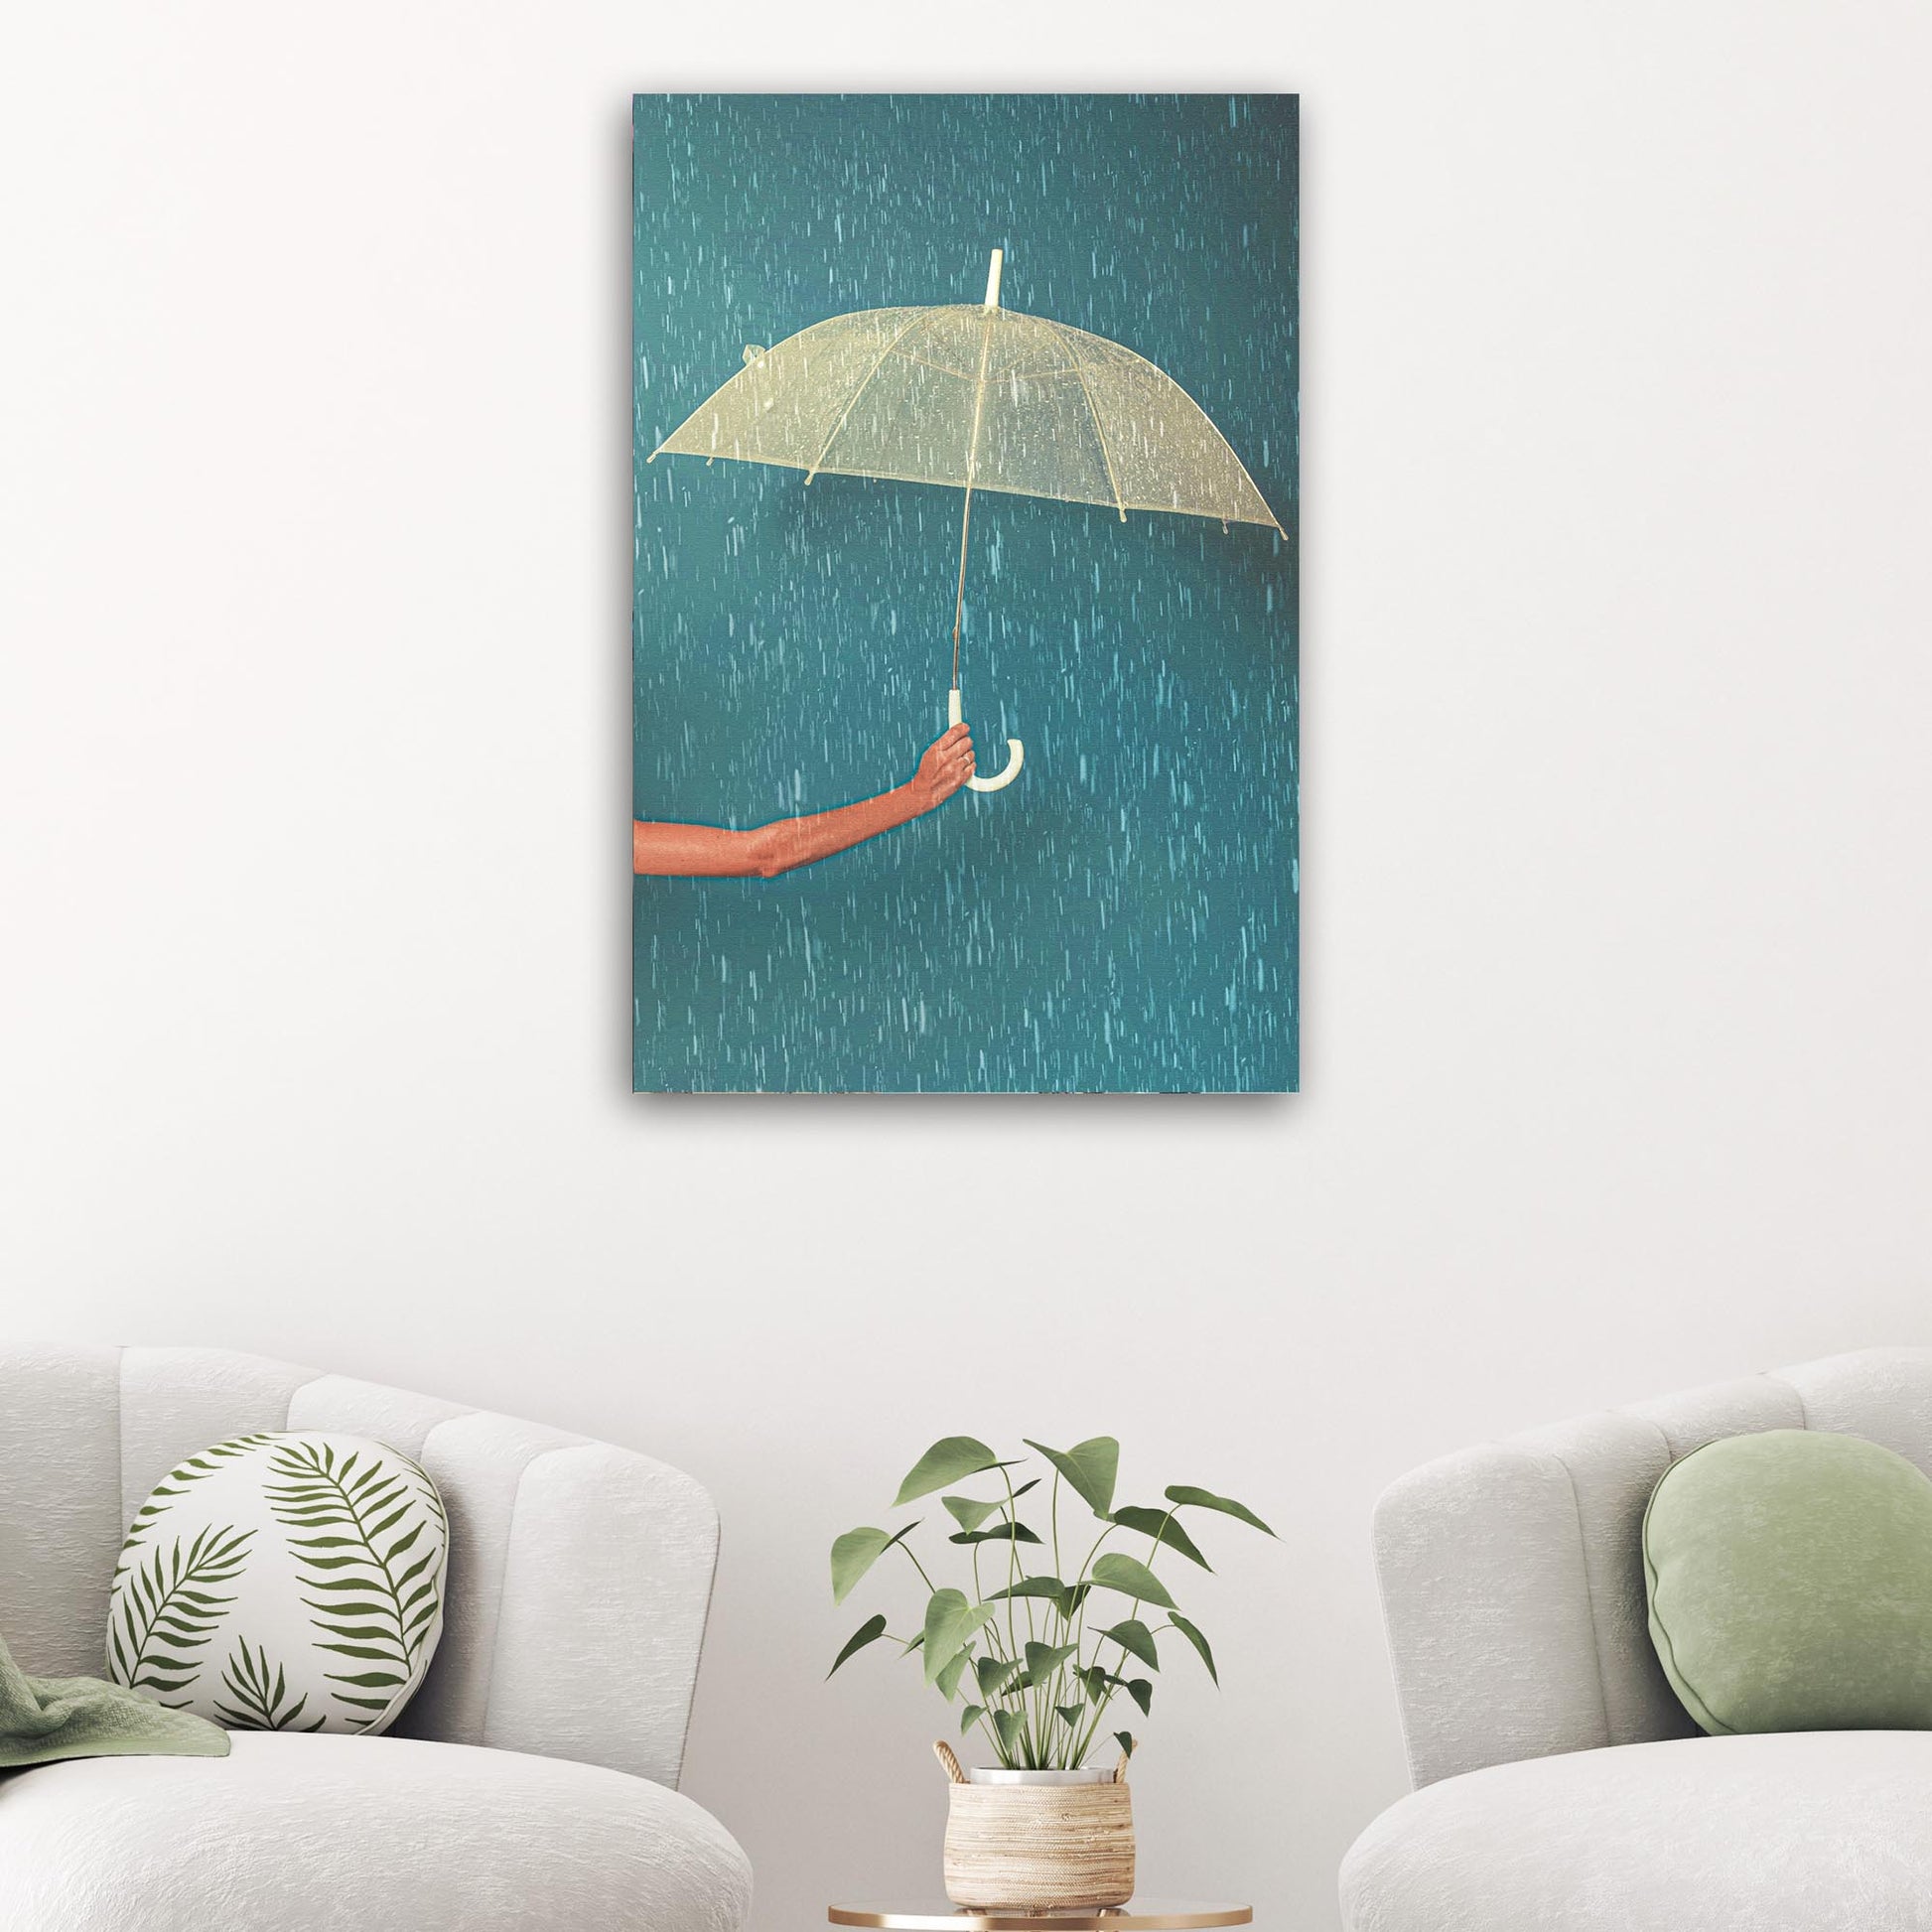 Decor Elements Umbrella Protecting Hand Canvas Wall Art Style 1 - Image by Tailored Canvases